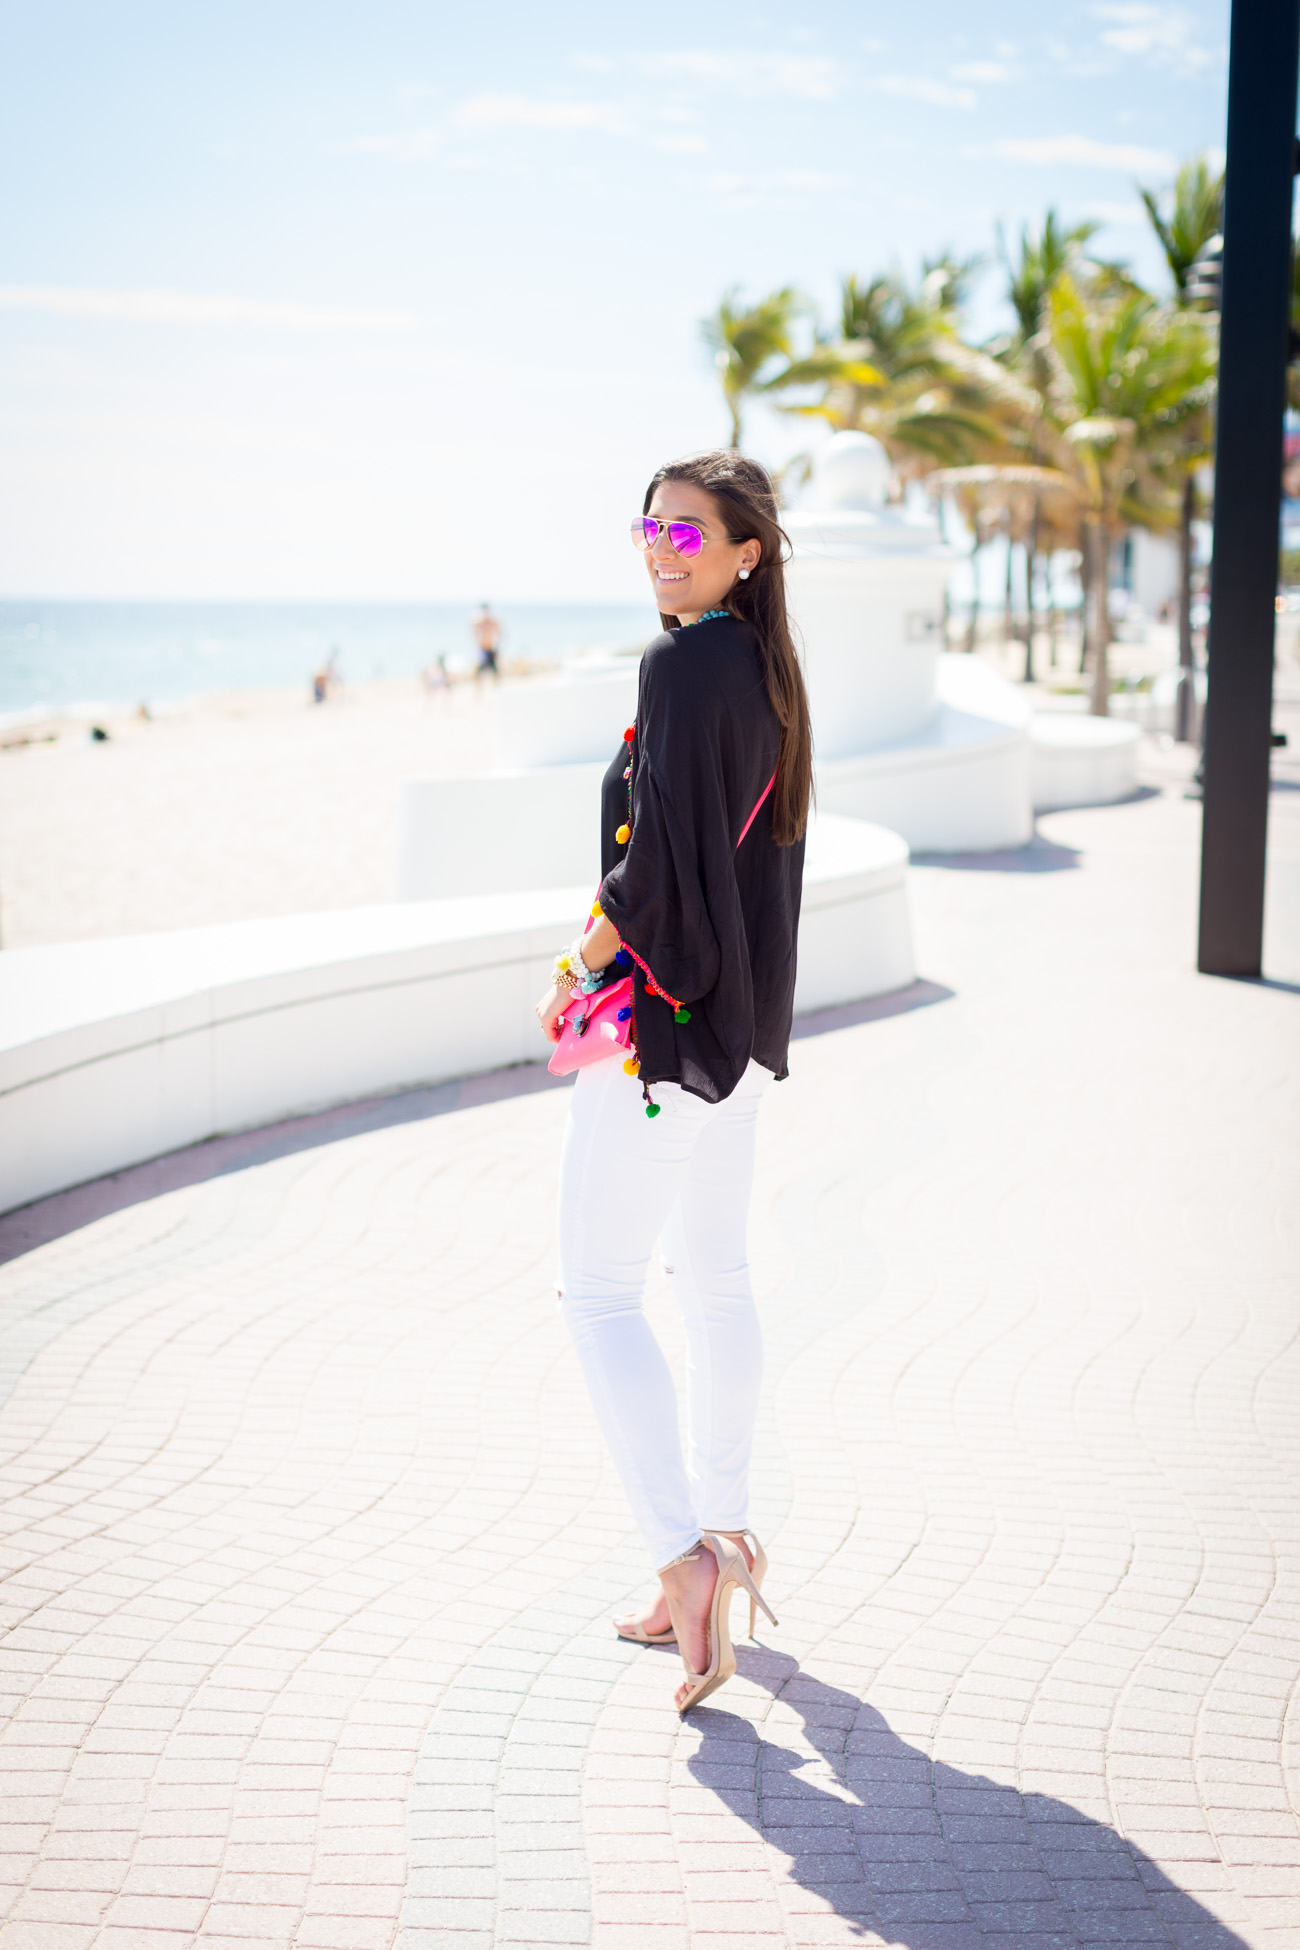 beach kaftan, beach caftan, beach pom caftan, pom pom shirt, pom pom caftan, fuchsia crossbody bag, pink crossbody bag, turquoise statement necklace, turquoise jewelry, beach outfit, beach fashion, vacation outfit, vacation outfit, pink mirror aviators, pom outfit // grace wainwright from a southern drawl